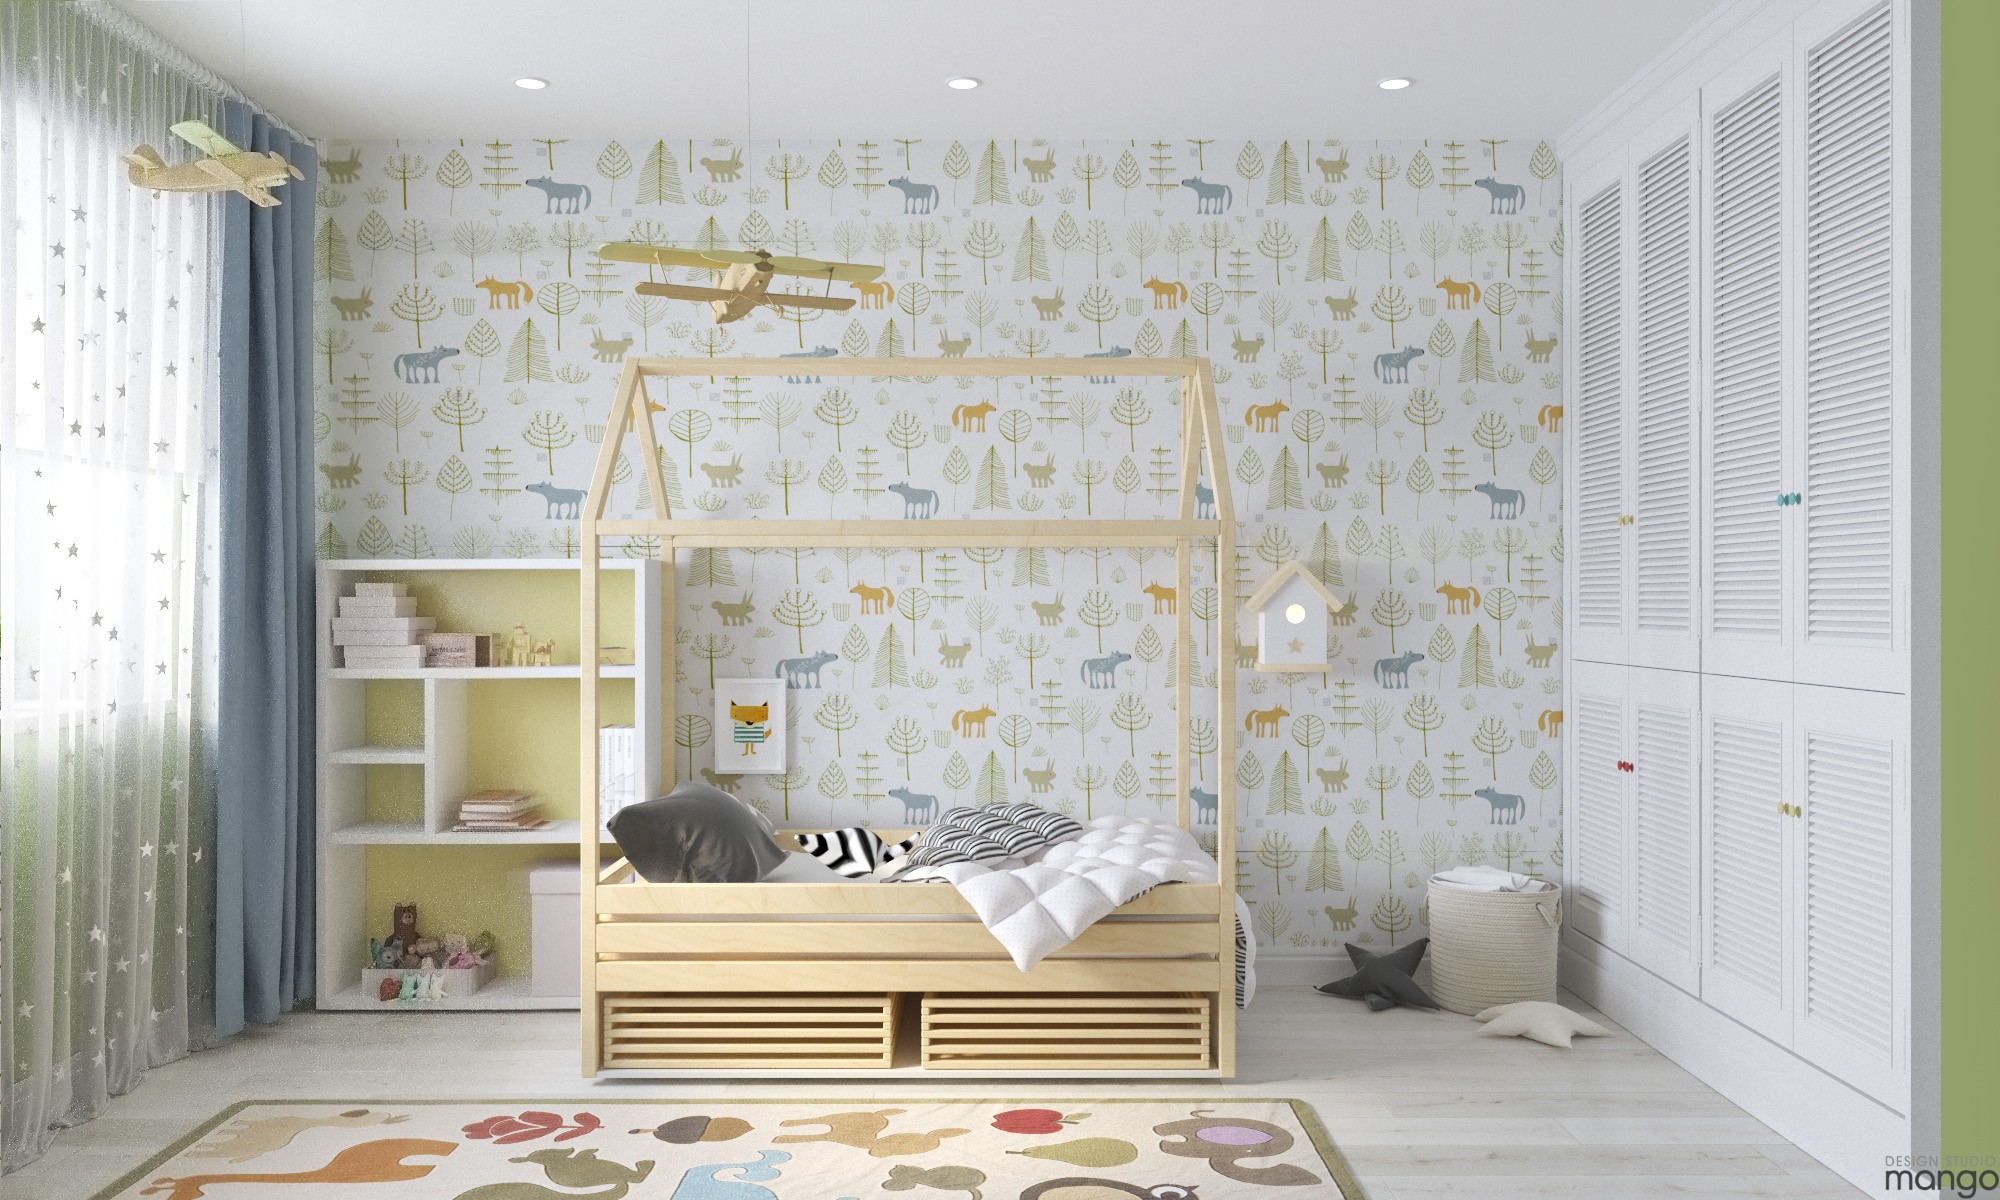 cute wallpaper decor "width =" 2000 "height =" 1200 "srcset =" https://mileray.com/wp-content/uploads/2020/05/1588509004_399_Colorful-Kids-Room-Designs-With-Adorable-Decor-In-It-That.jpg 2000w, https: // myfashionos. de / wp-content / uploads / 2016/10 / Design-Studio-Mango3-300x180.jpg 300w, https://mileray.com/wp-content/uploads/2016/10/Design-Studio-Mango3-768x461.jpg 768w, https://mileray.com/wp-content/uploads/2016/10/Design-Studio-Mango3-1024x614.jpg 1024w, https://mileray.com/wp-content/uploads/2016/10/Design -Studio-Mango3-696x418.jpg 696w, https://mileray.com/wp-content/uploads/2016/10/Design-Studio-Mango3-1068x641.jpg 1068w, https://mileray.com/wp-content /uploads/2016/10/Design-Studio-Mango3-700x420.jpg 700w "sizes =" (maximum width: 2000px) 100vw, 2000px